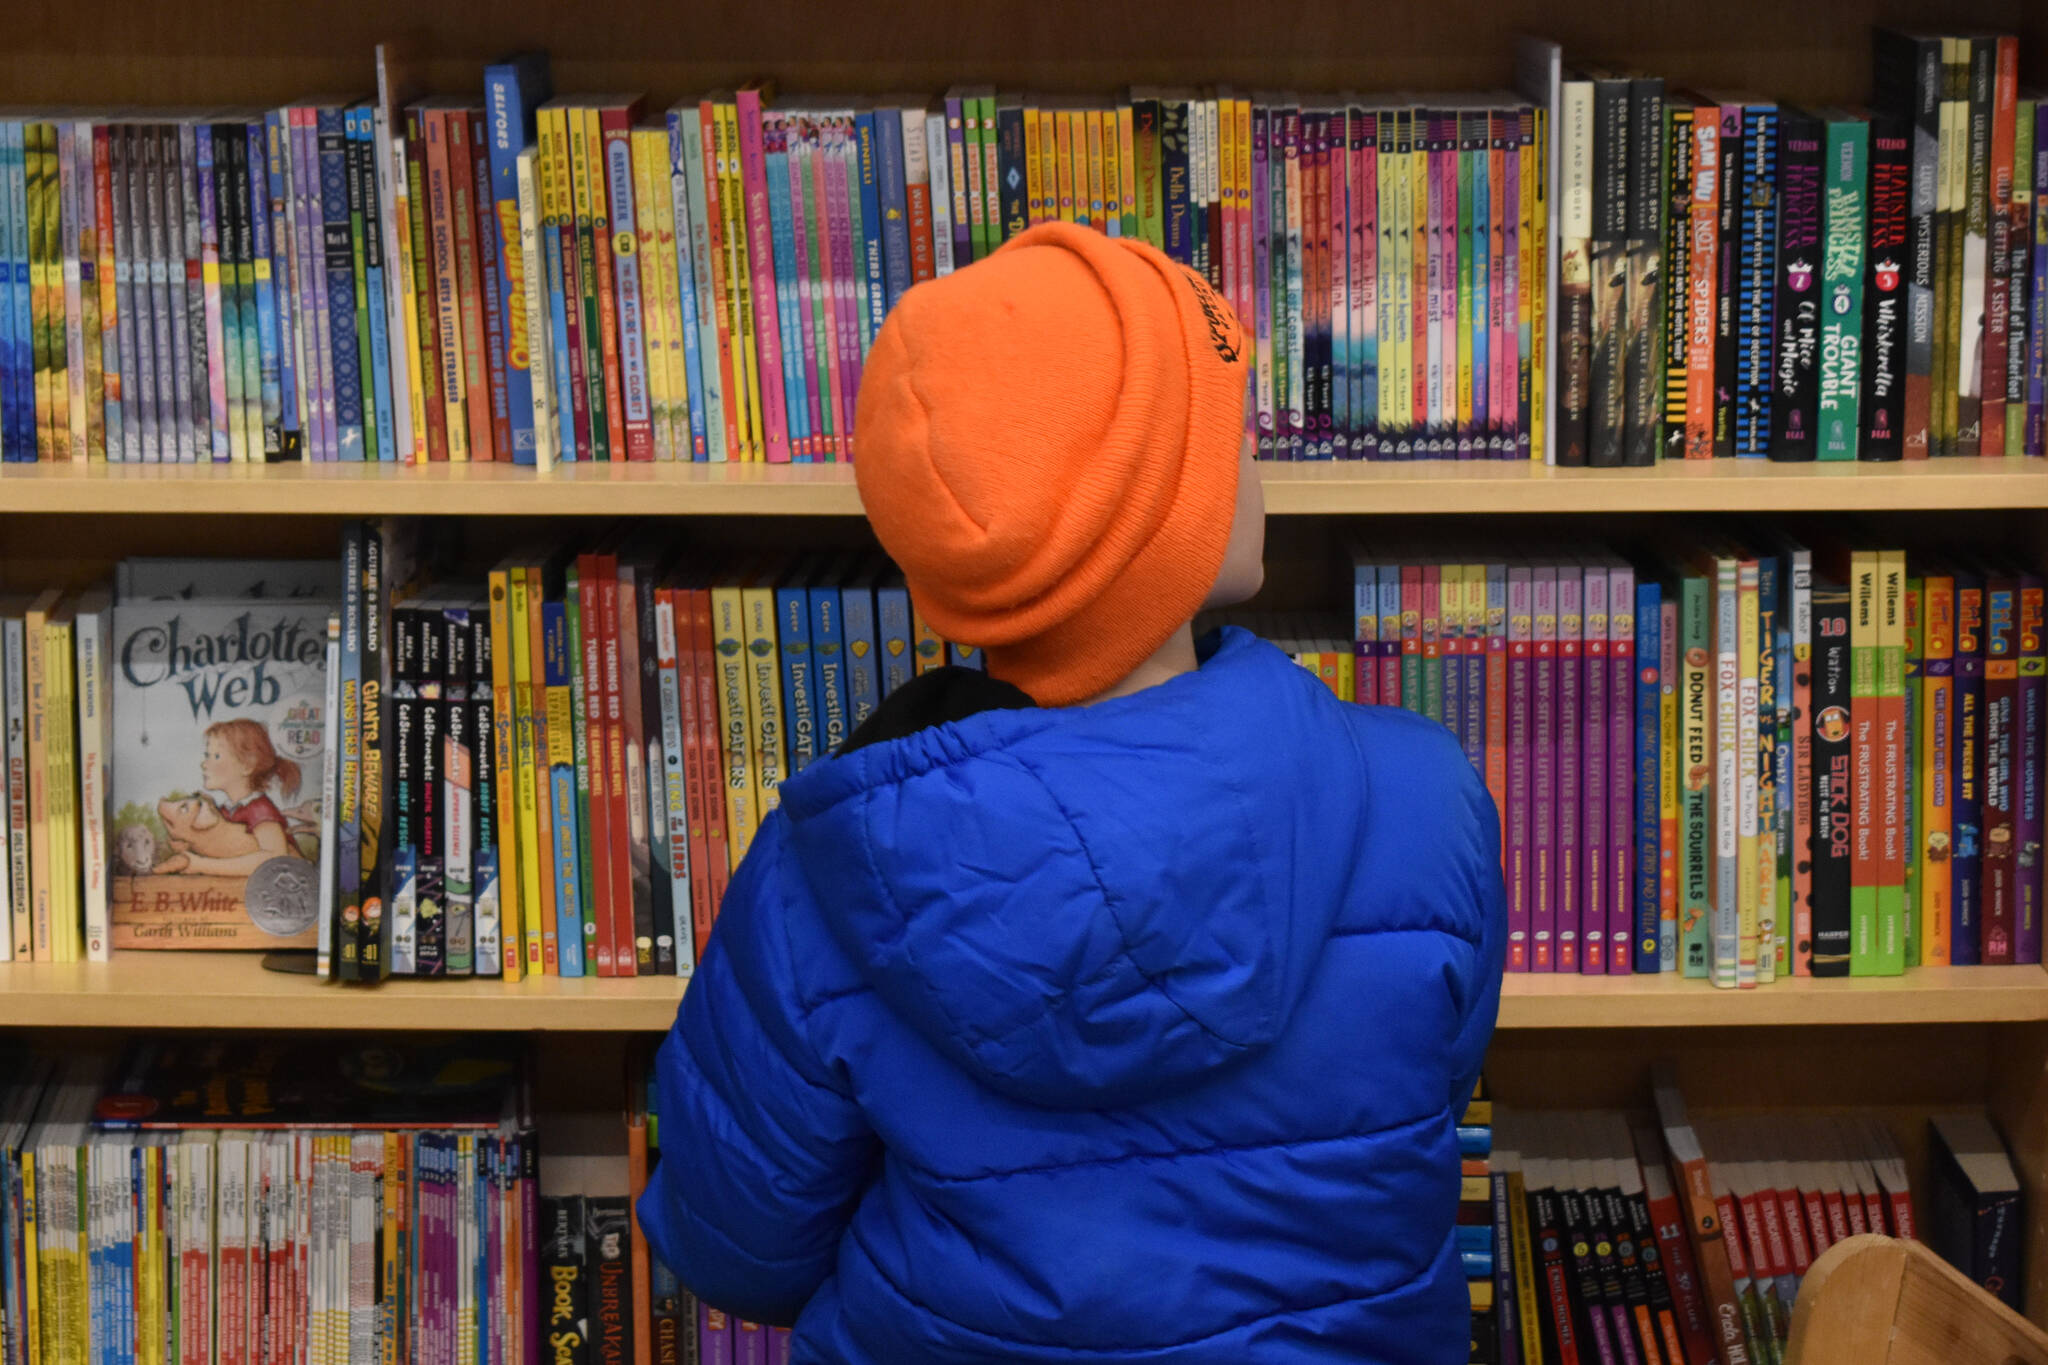 A Soldotna Elementary student weighs his options in front of shelves of books on Wednesday, March 8, 2023, at River City Books in Soldotna, Alaska. (Jake Dye/Peninsula Clarion)